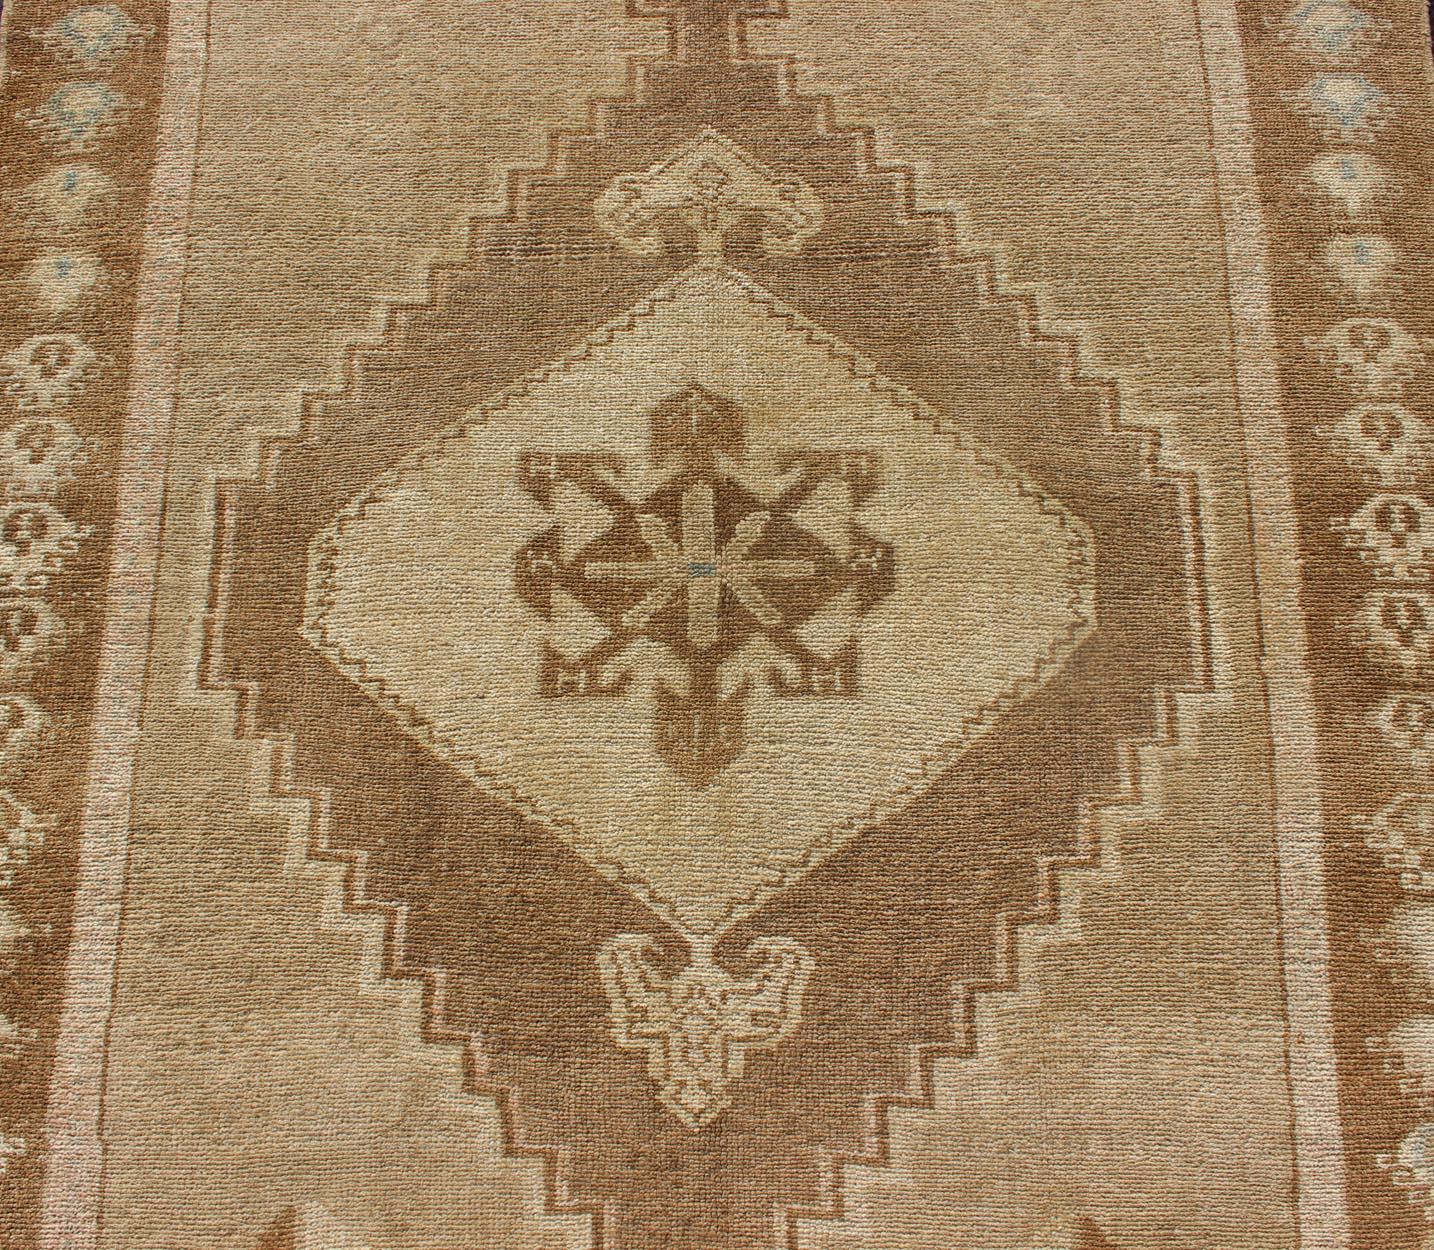 Wool Large Gallery Turkish Rug in Earth Tones, Light Brown with Three Medallions For Sale